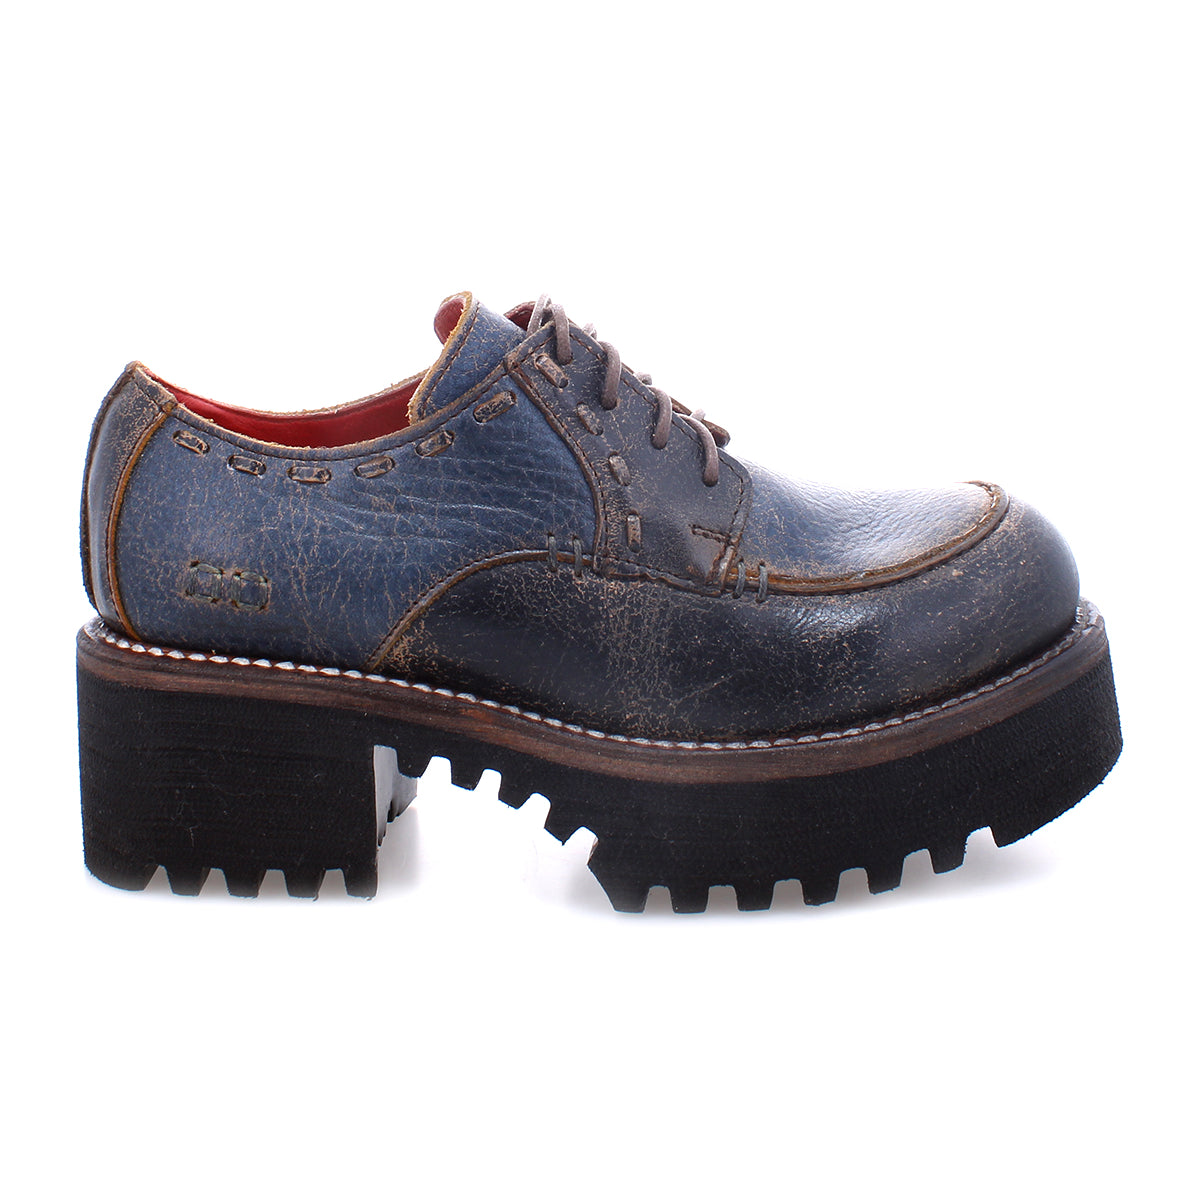 A pair of blue Bed Stu Yazar oxford shoes with black soles.